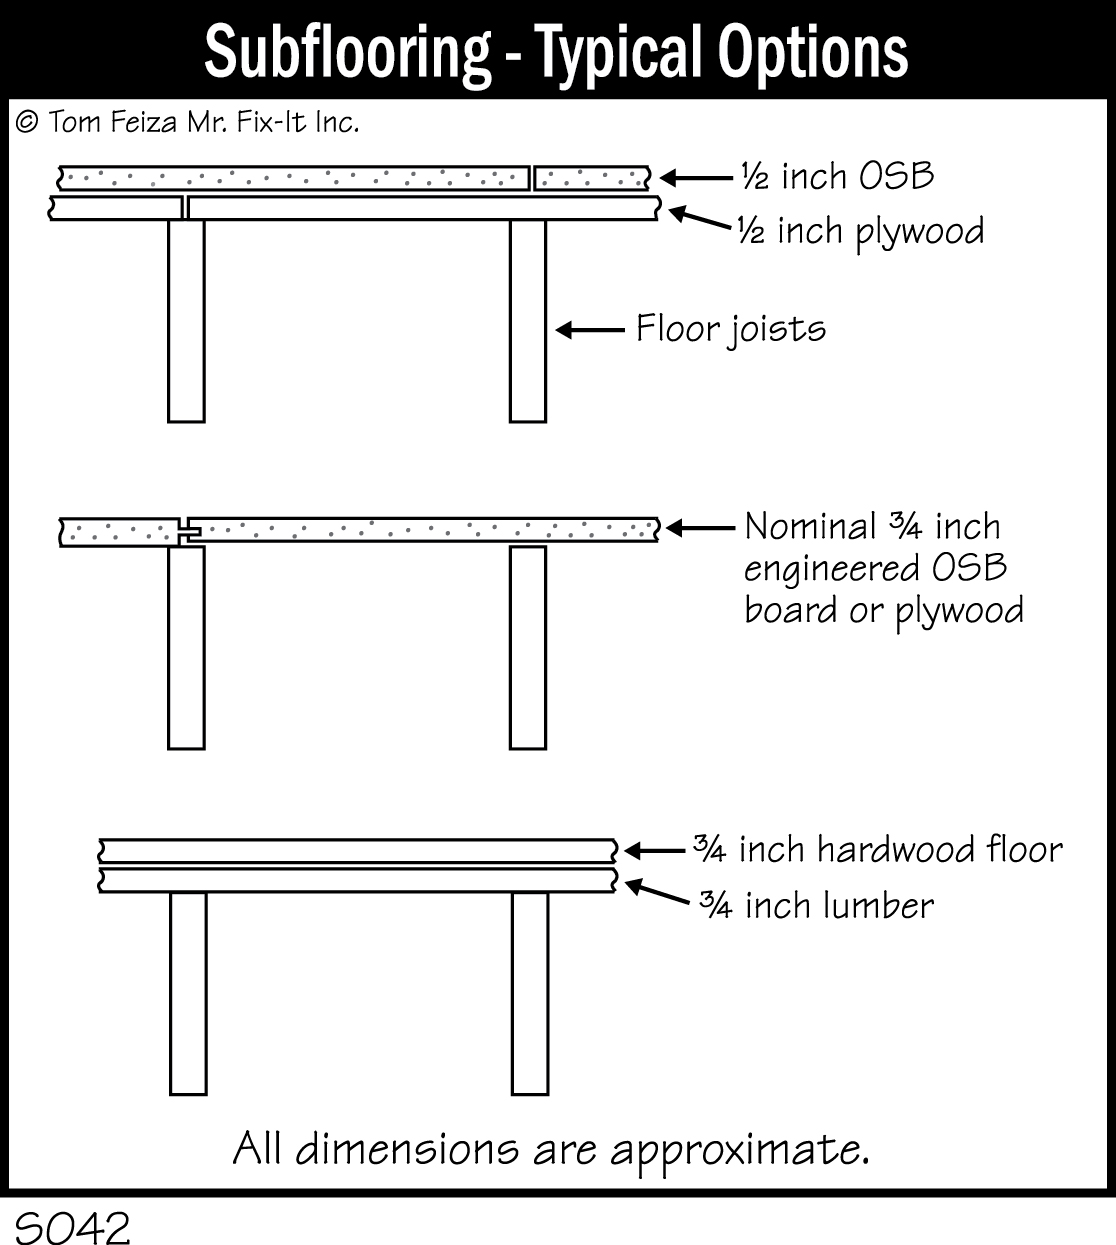 S042 - Subflooring - Typical Options